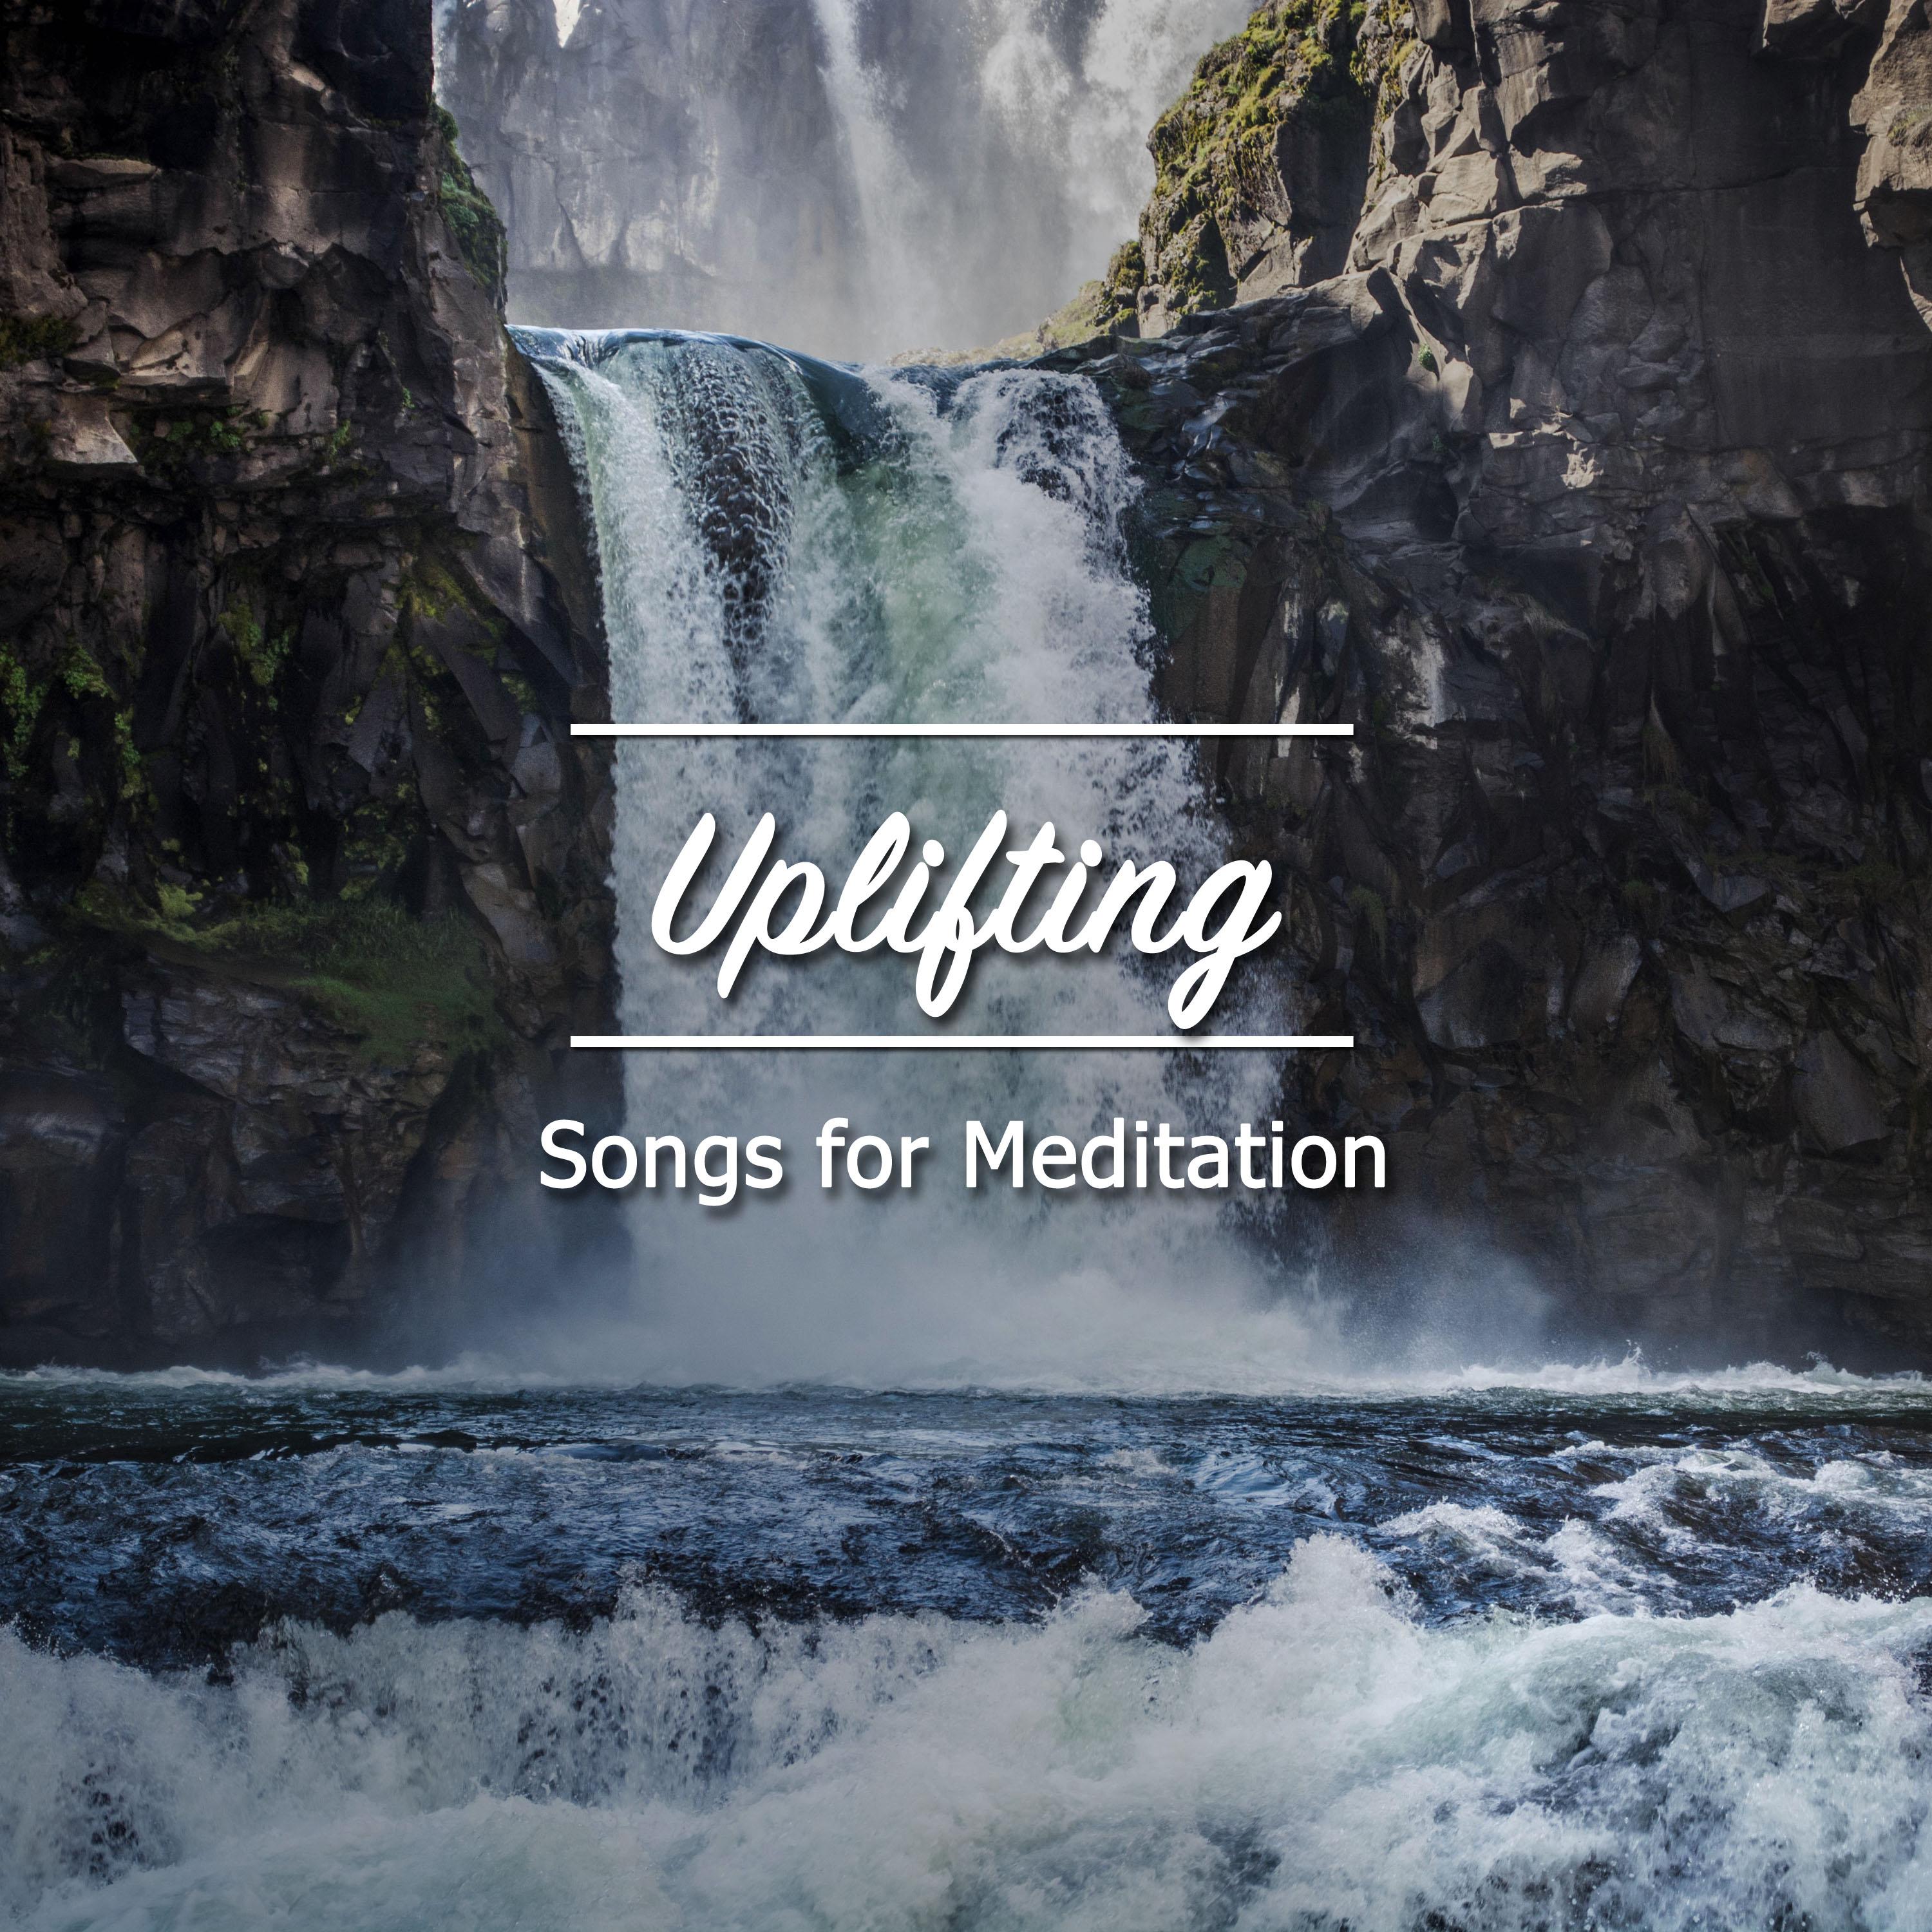 19 Mood Uplifting Songs for Guided Meditation